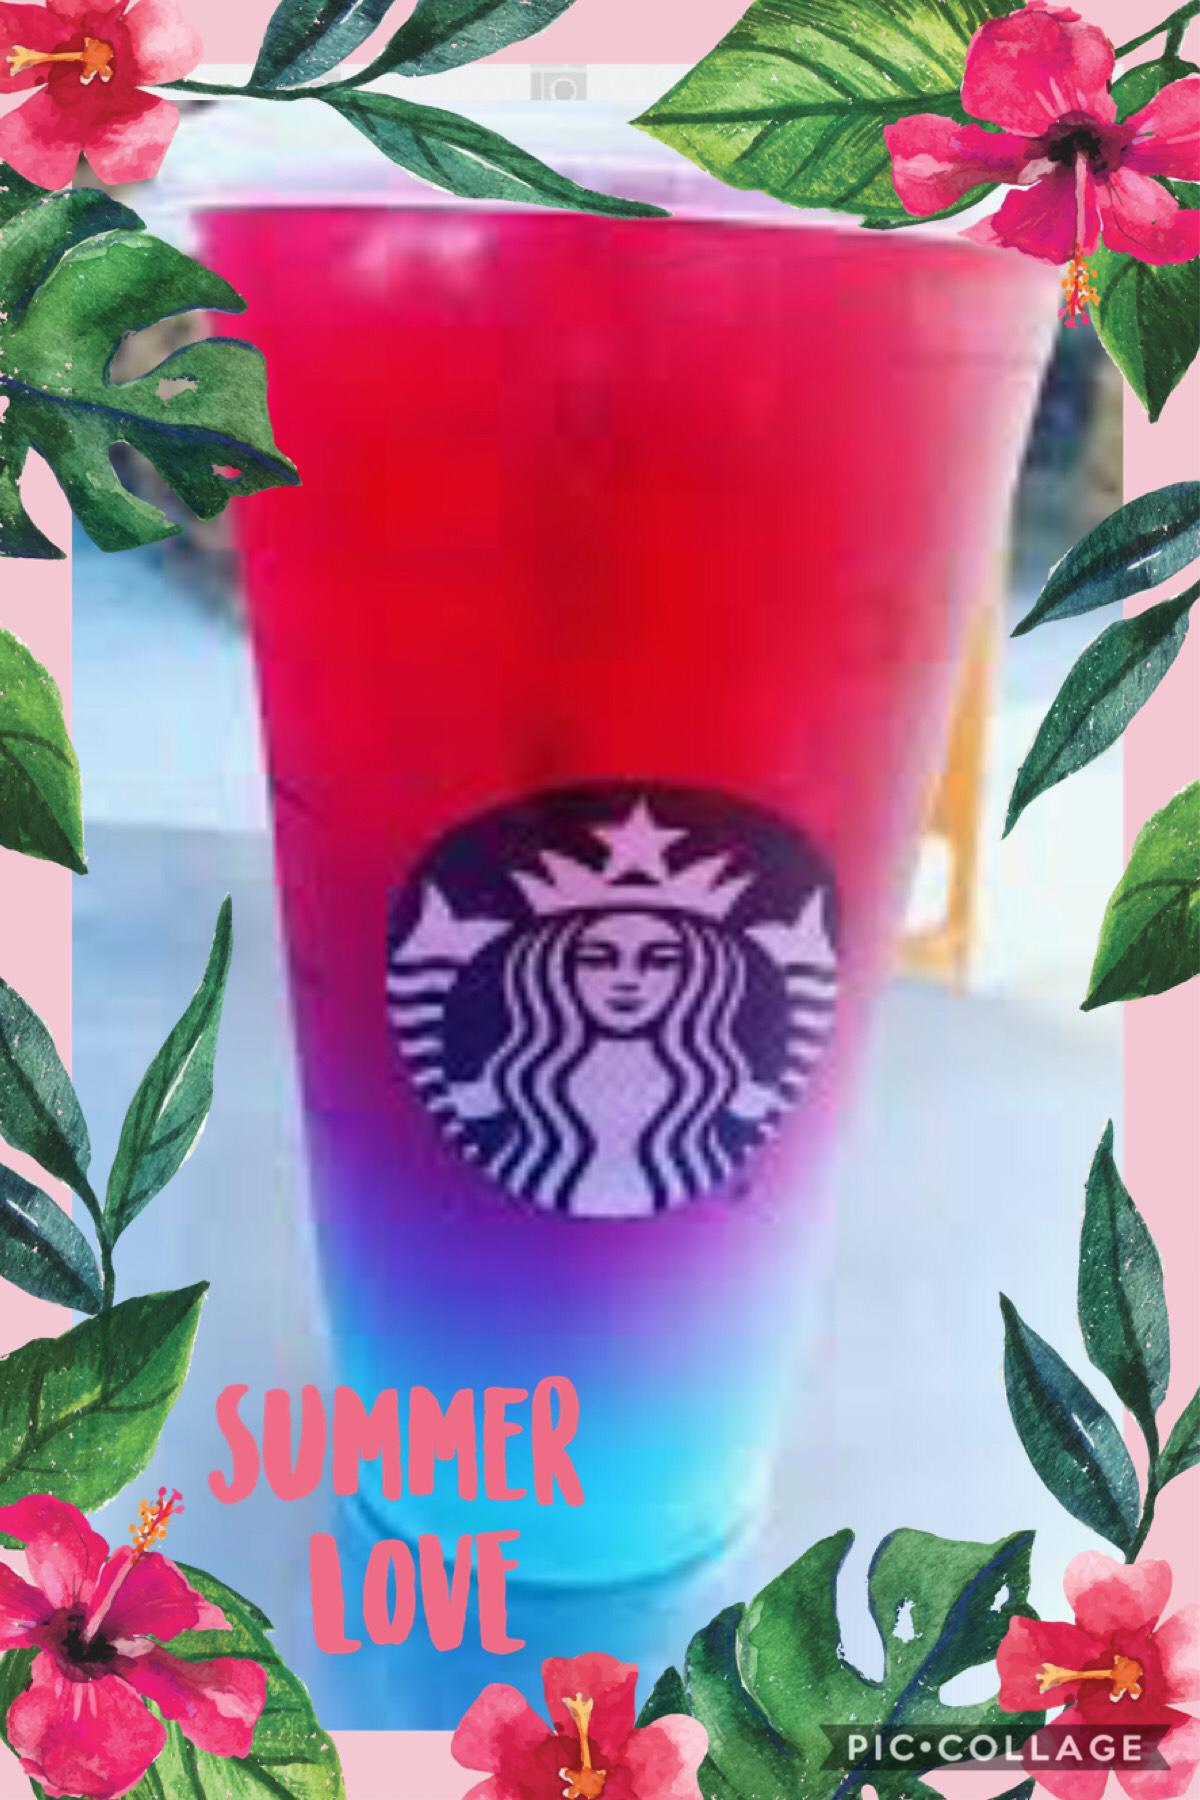 WHO DOESN’T LOVE STARBUCKS!❤️💜💙TAP❤️💜💙
